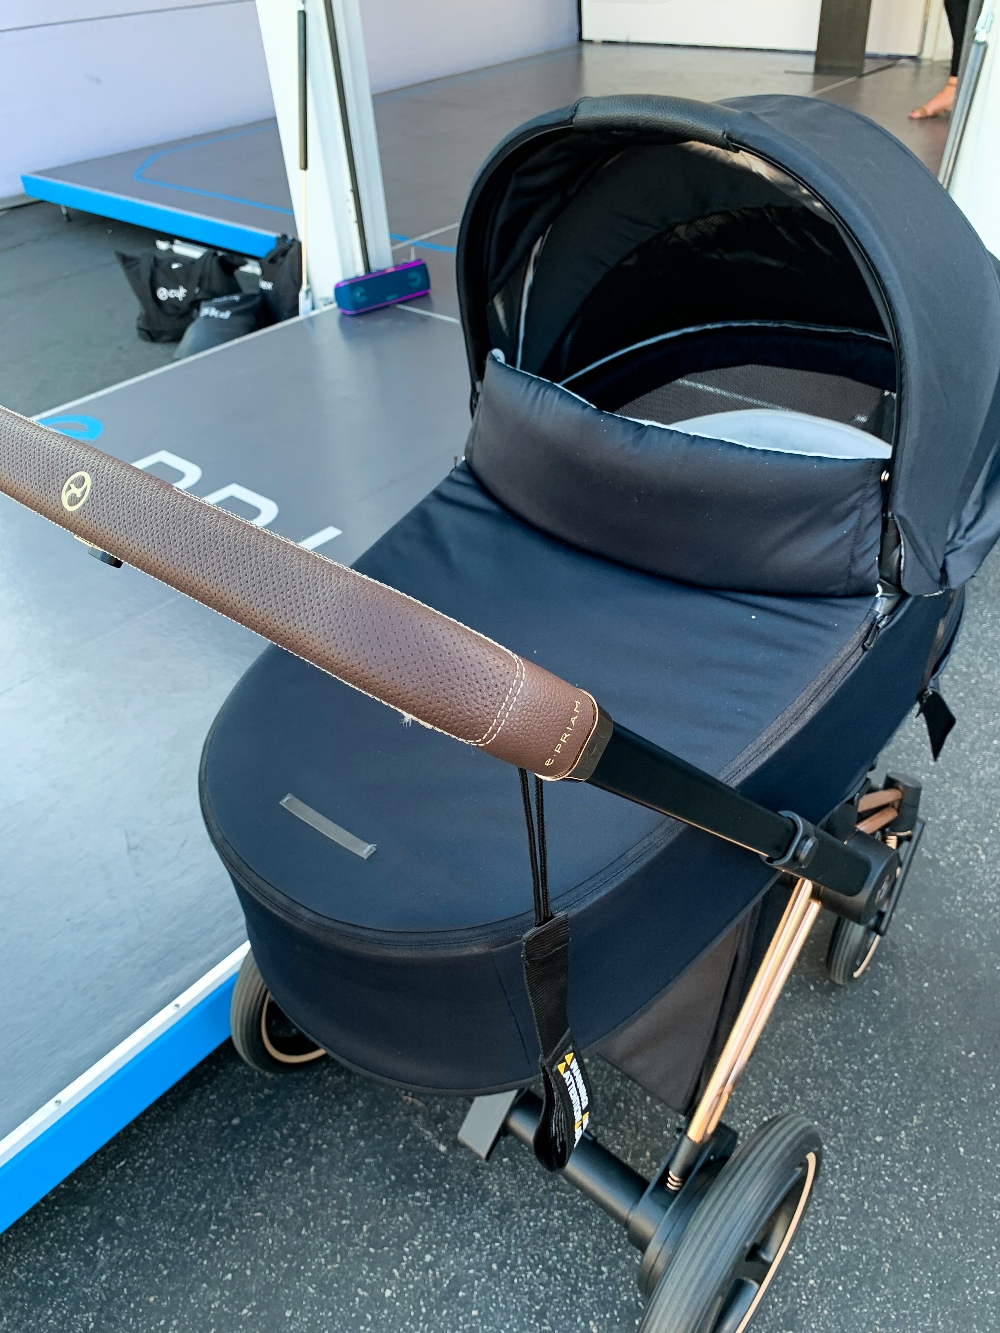 Review of the Best Luxury Stroller